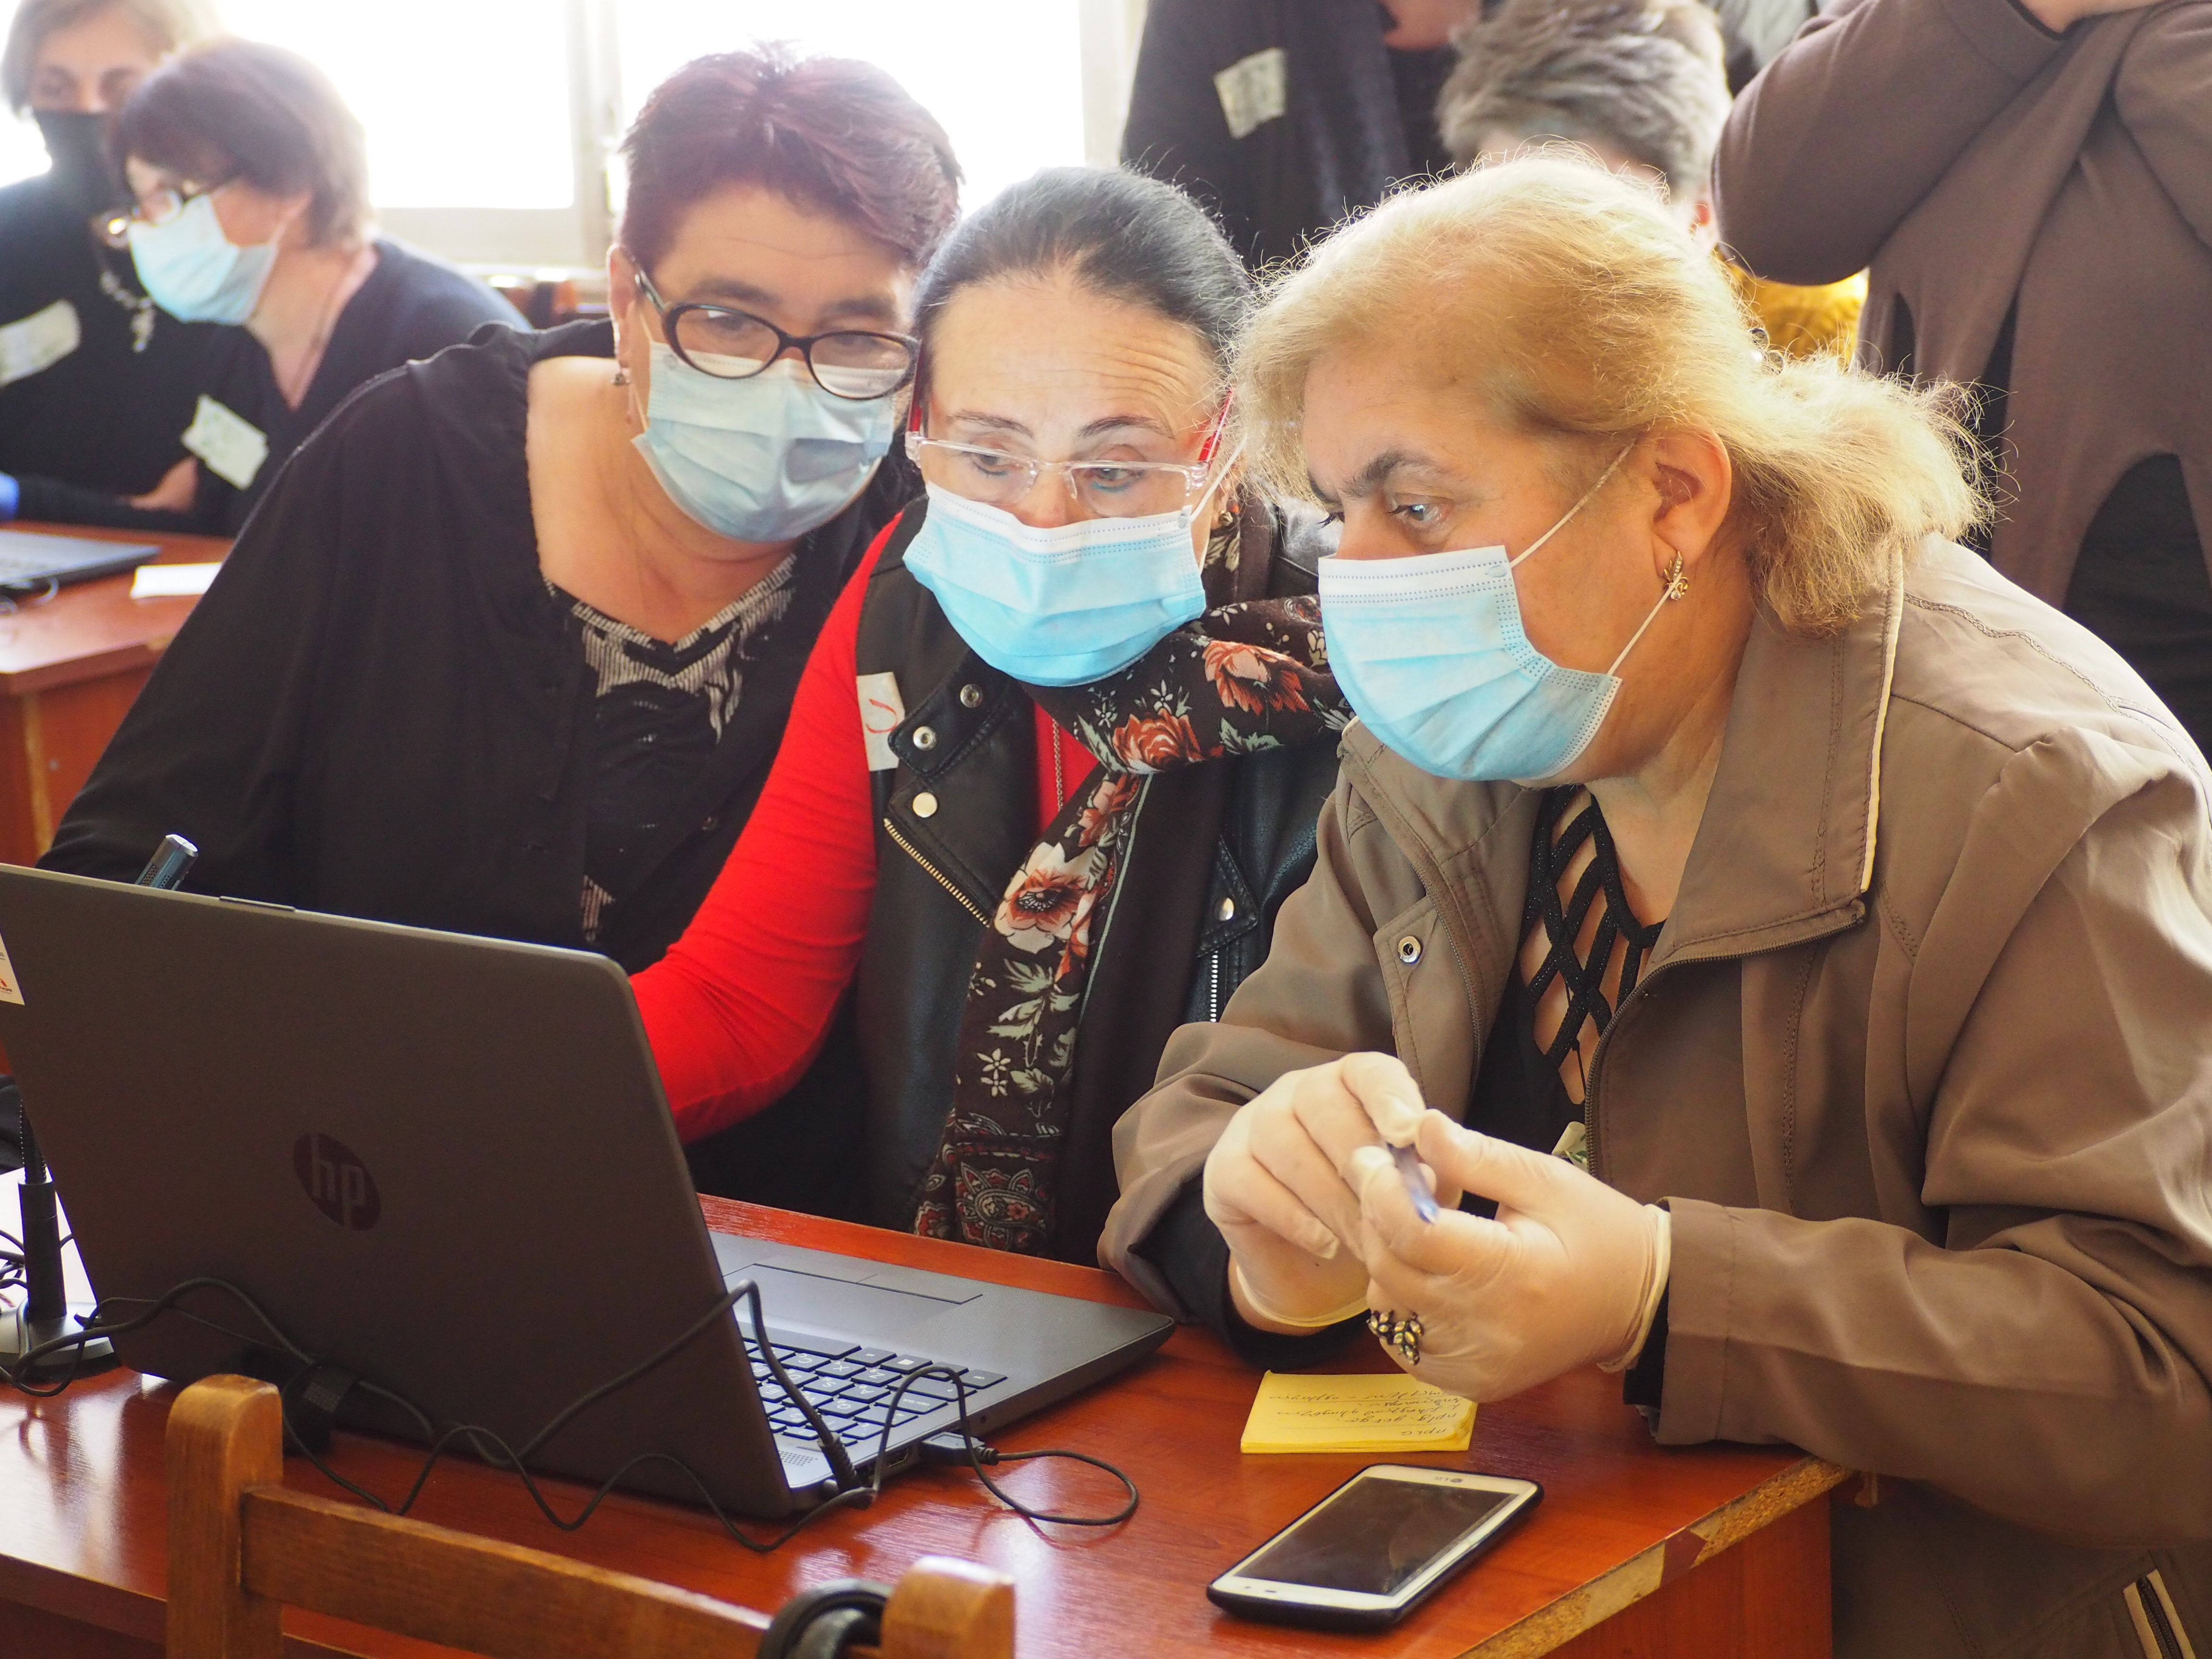 Polish aid improves access to online public services in Georgia’s mountainous regions